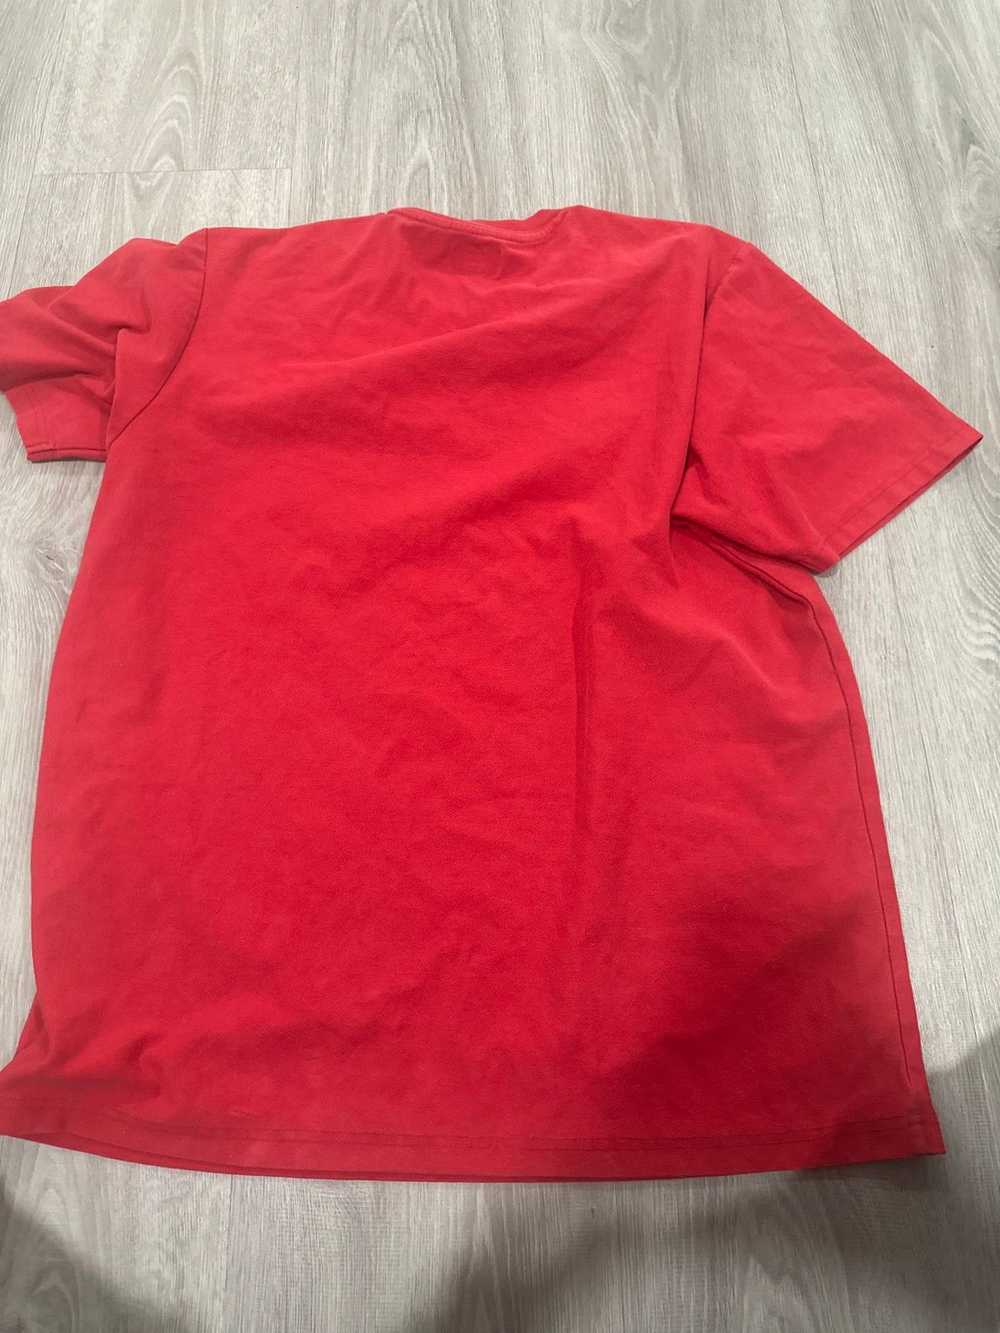 Supreme red supreme tee fuzzy letters (small grea… - image 8